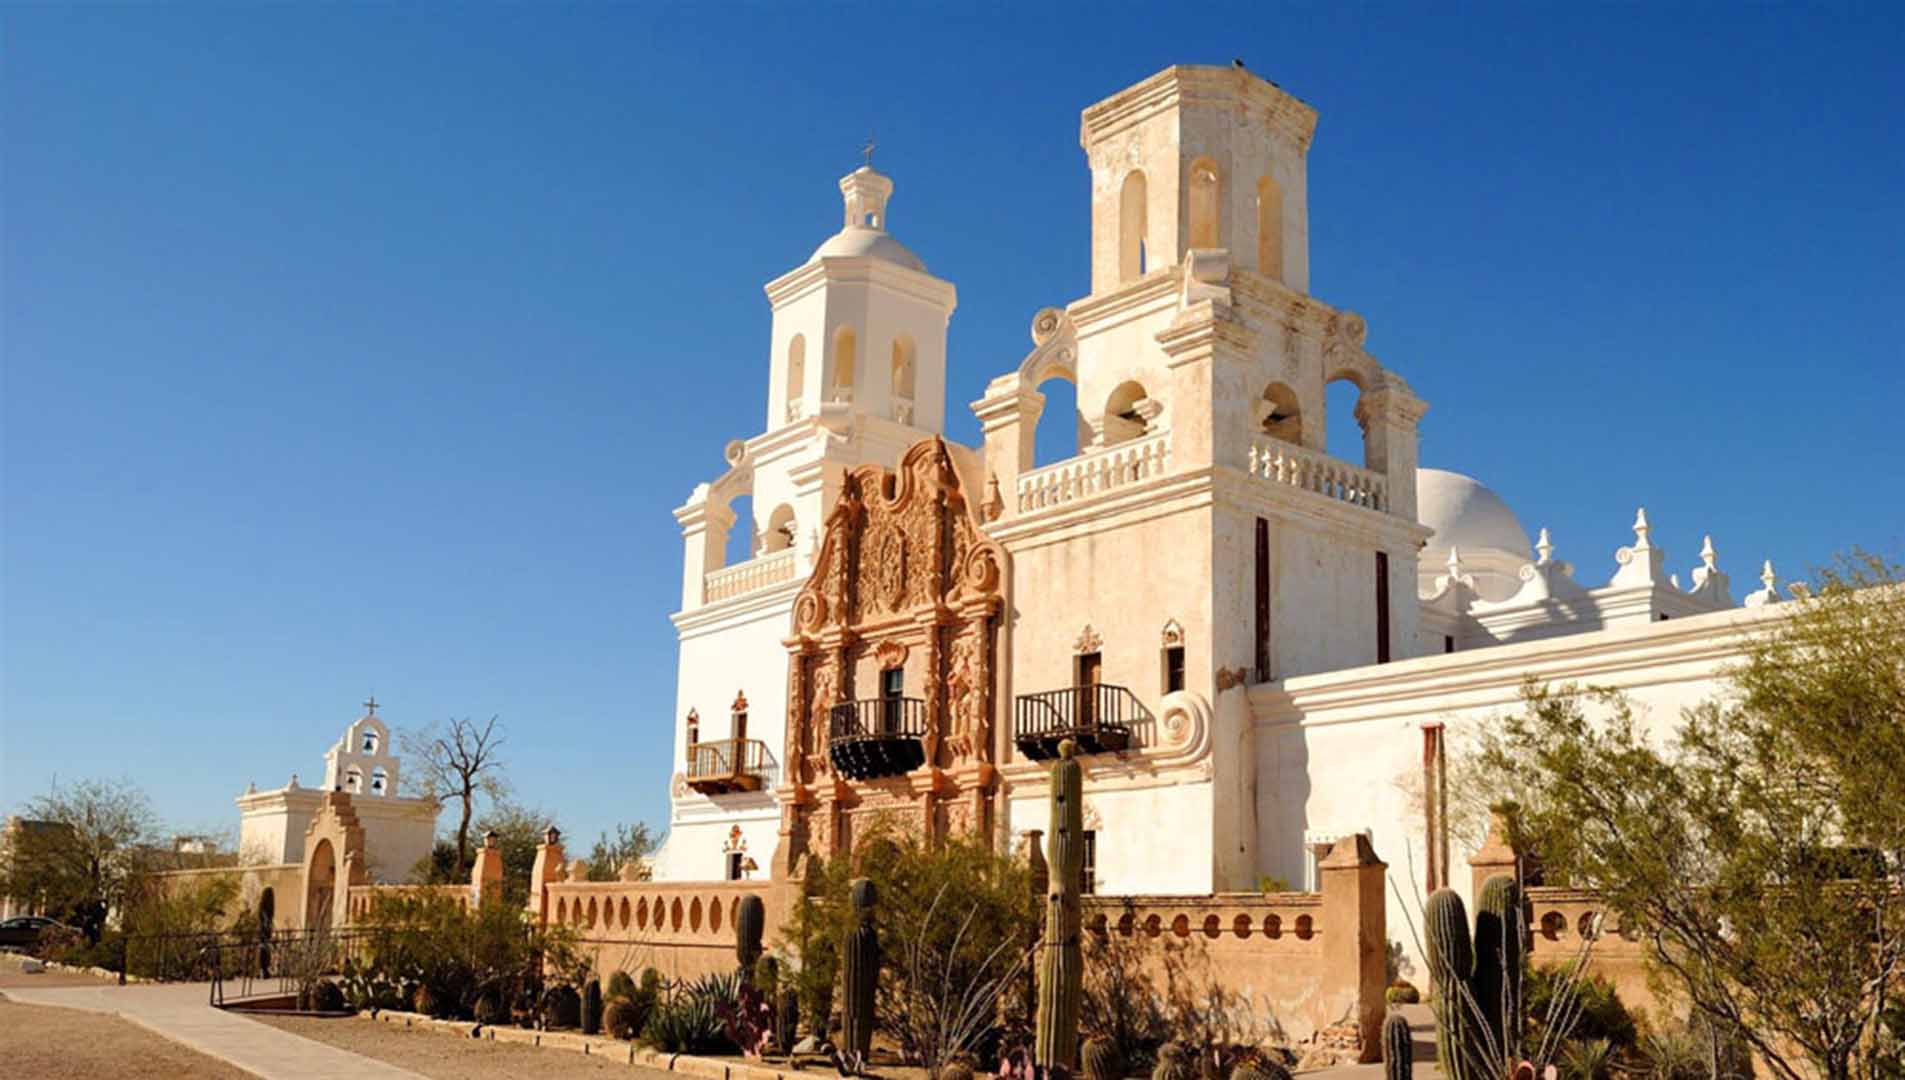 The mission San Xavier del Bac, the white dove of the desert. A preserved Spanish colonial chapel.